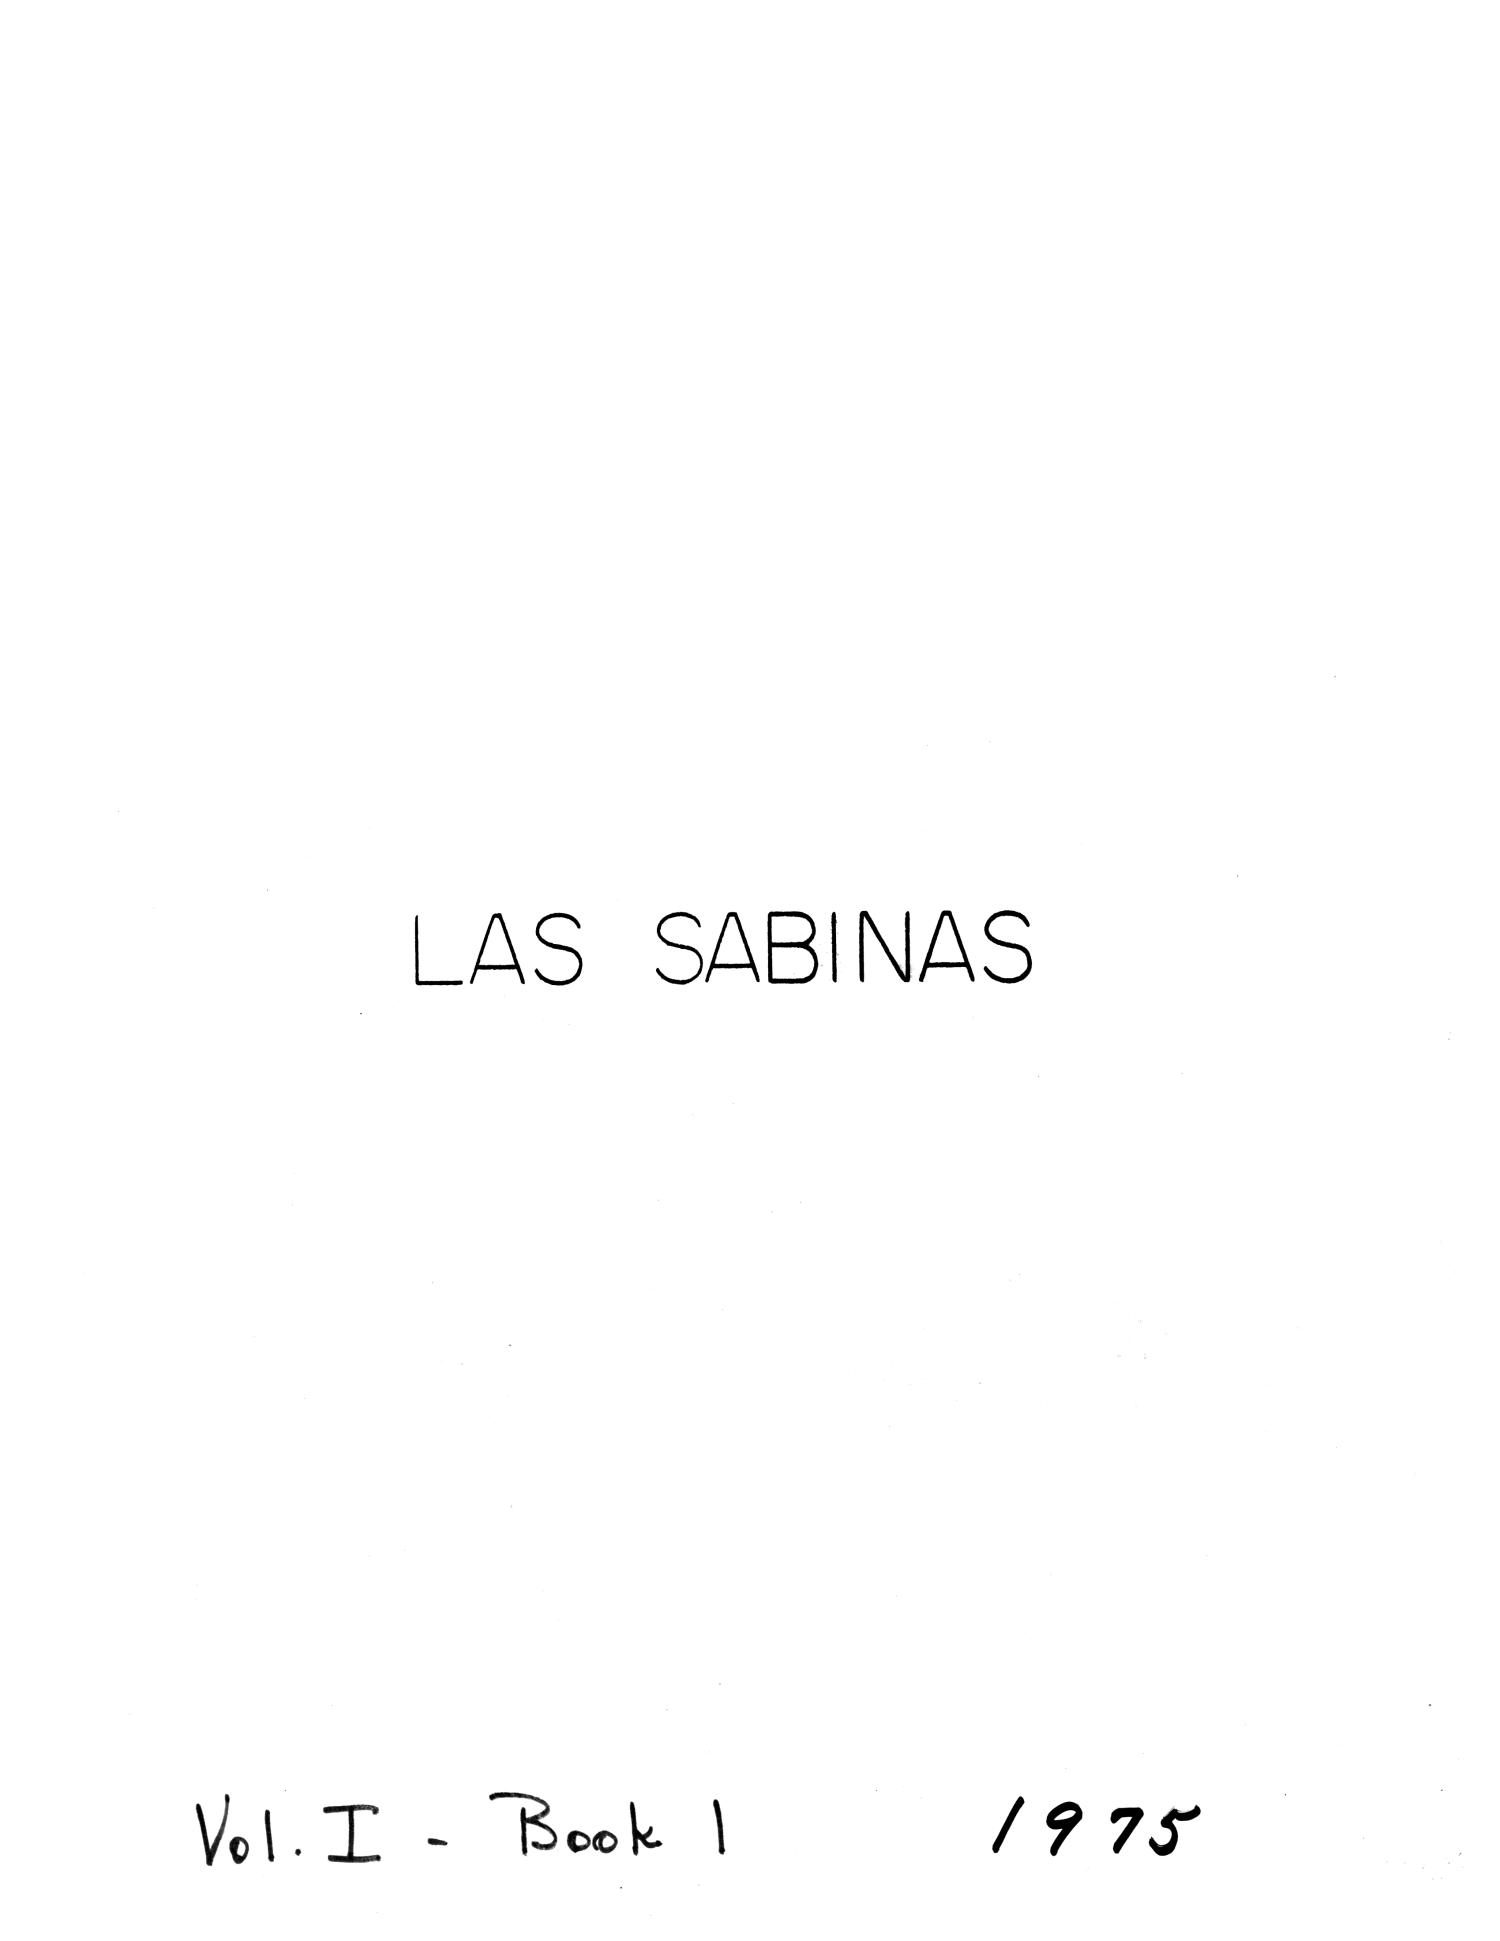 Las Sabinas, Volume 1, Number 1, January 1975
                                                
                                                    Front Cover
                                                